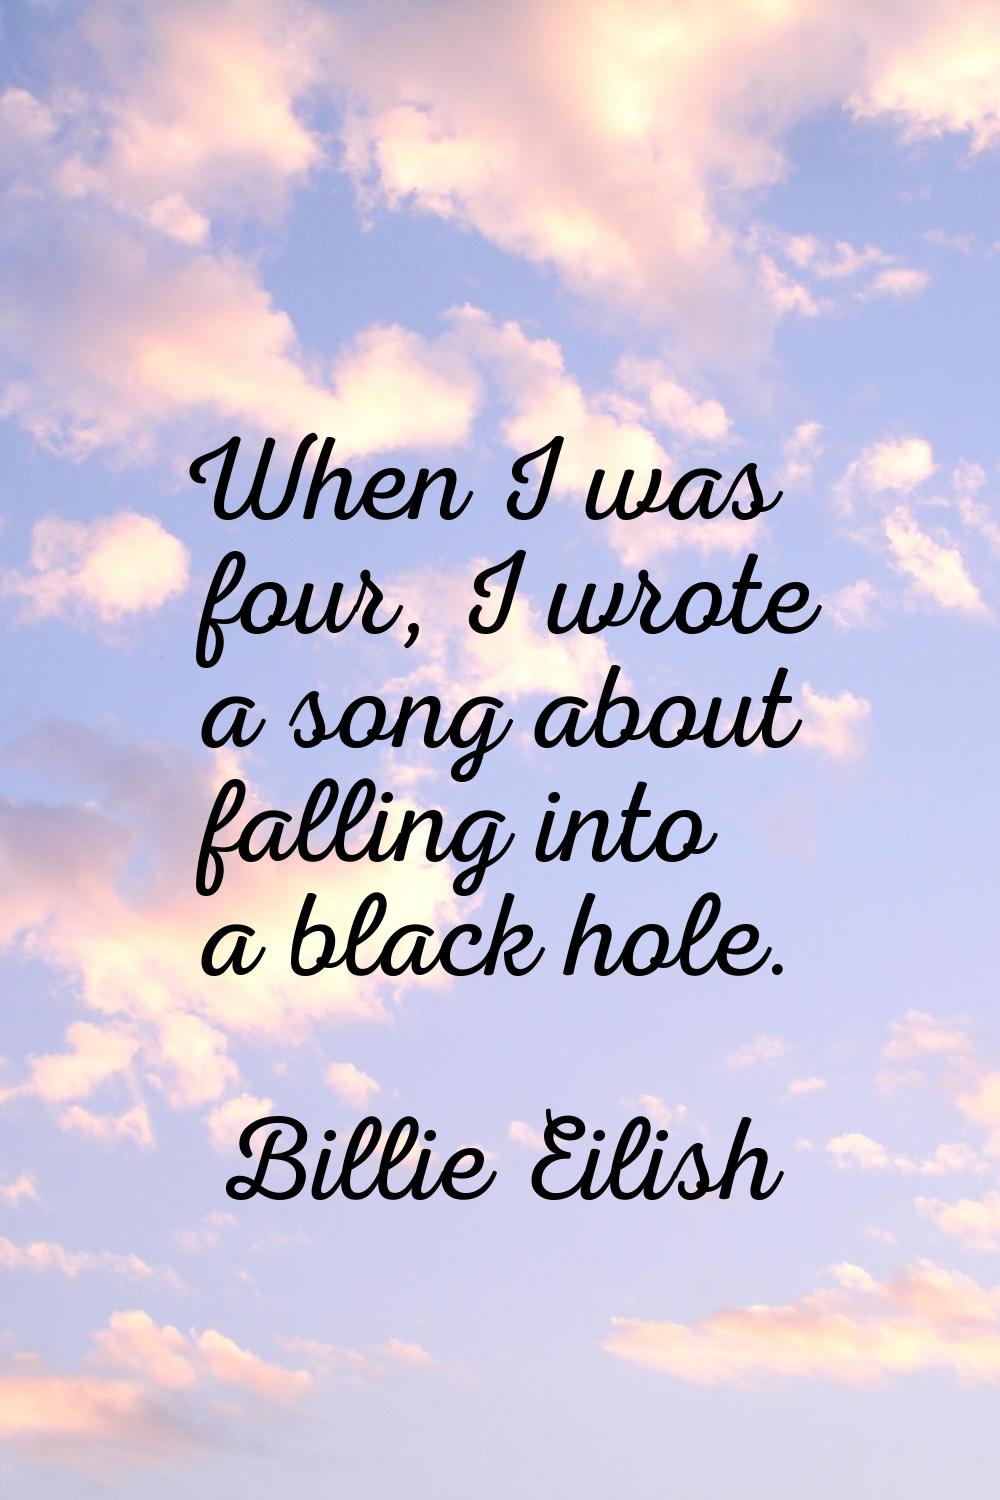 When I was four, I wrote a song about falling into a black hole.